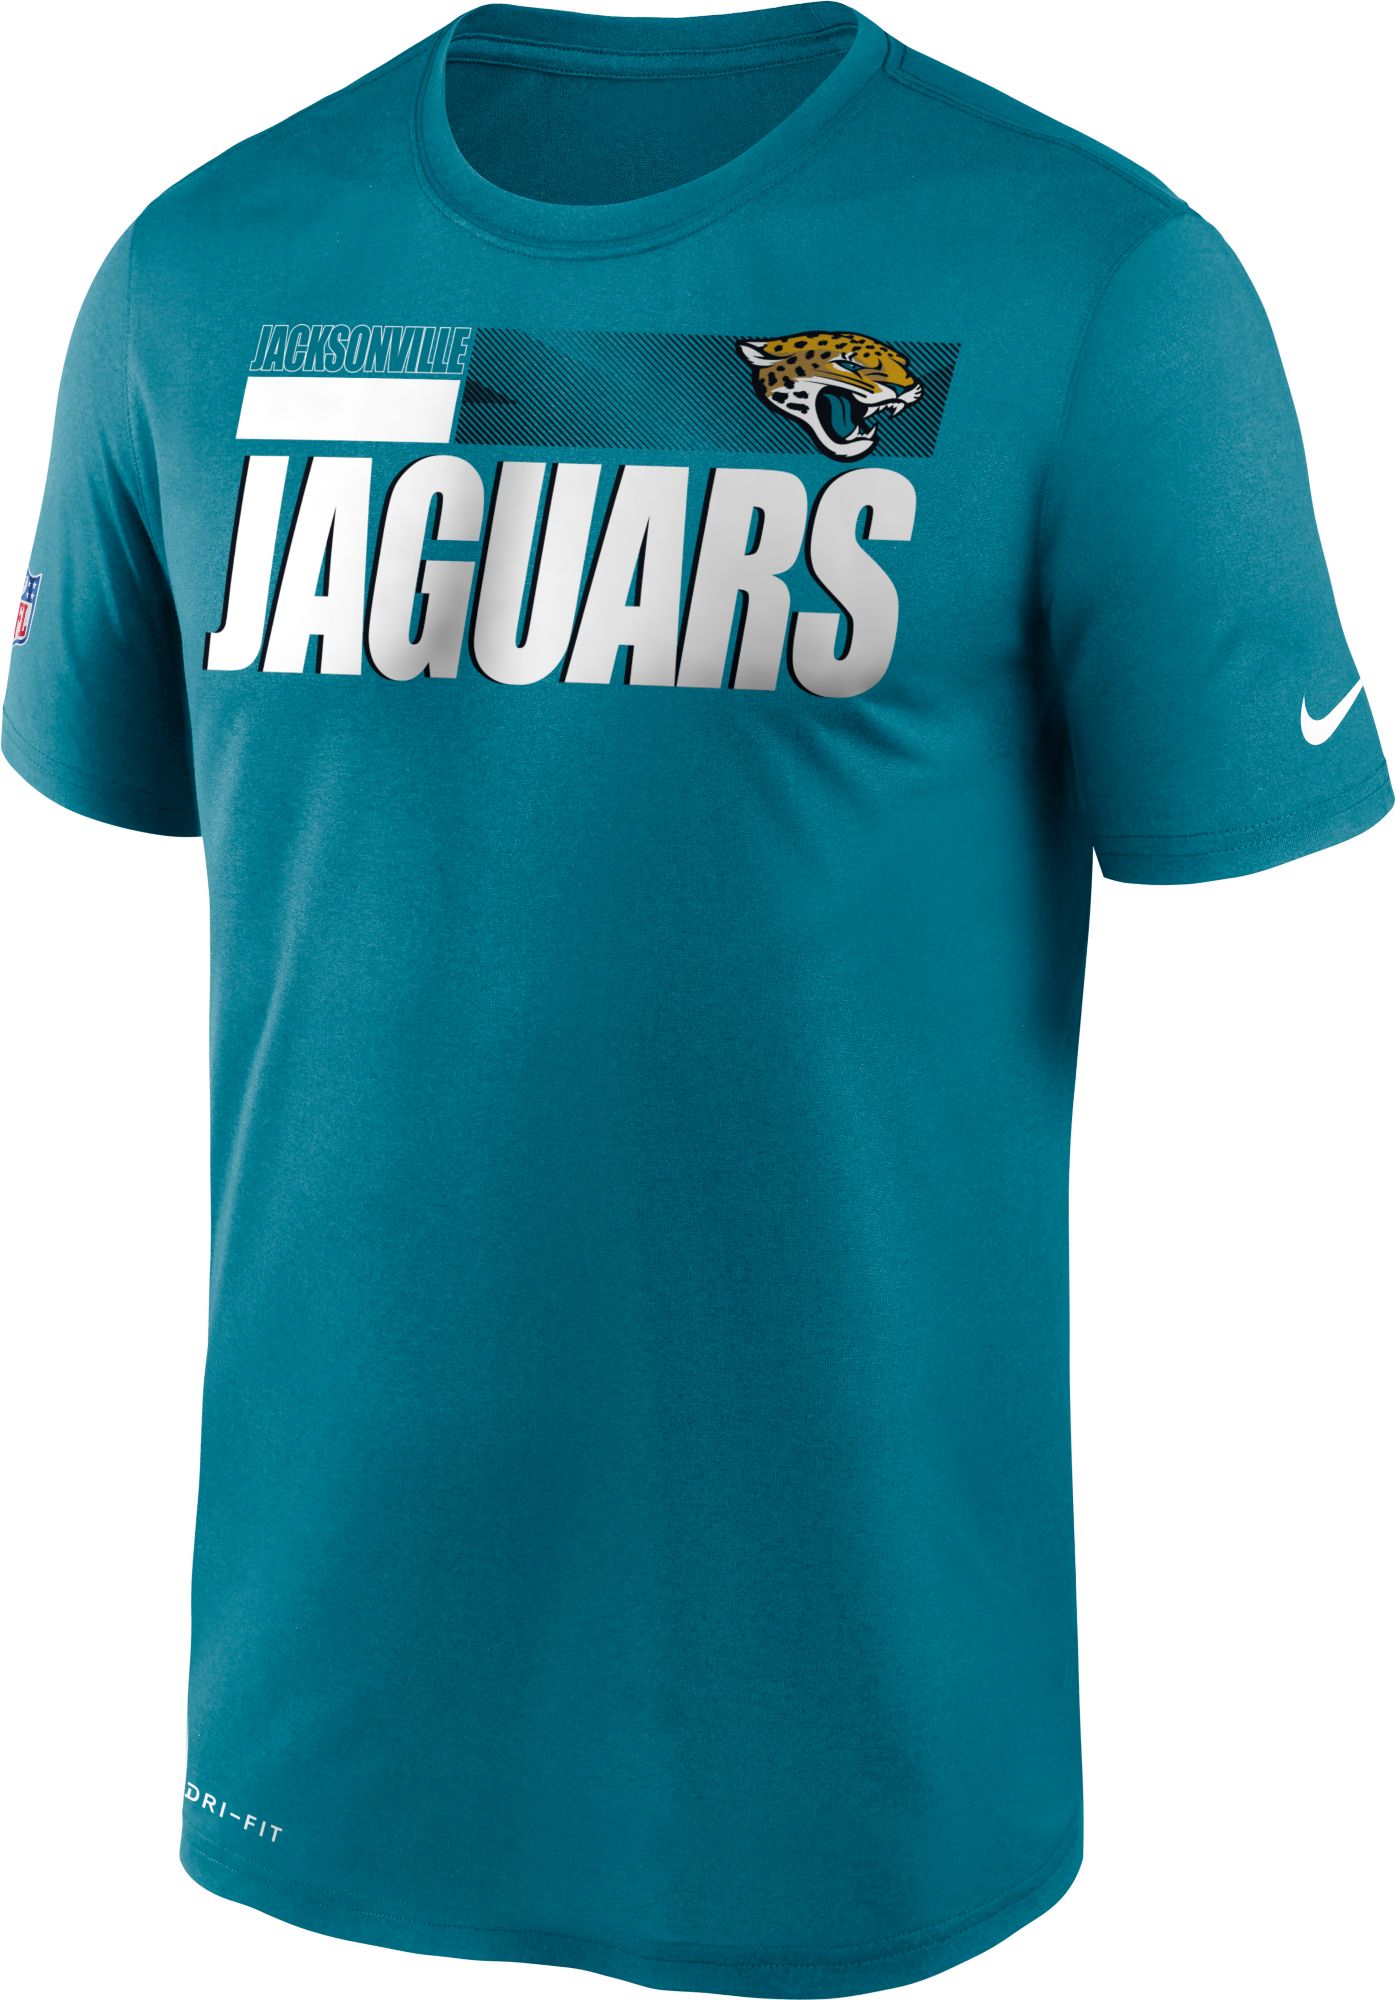 Jacksonville Jaguars Apparel & Gear | In-Store Pickup Available at DICK'S